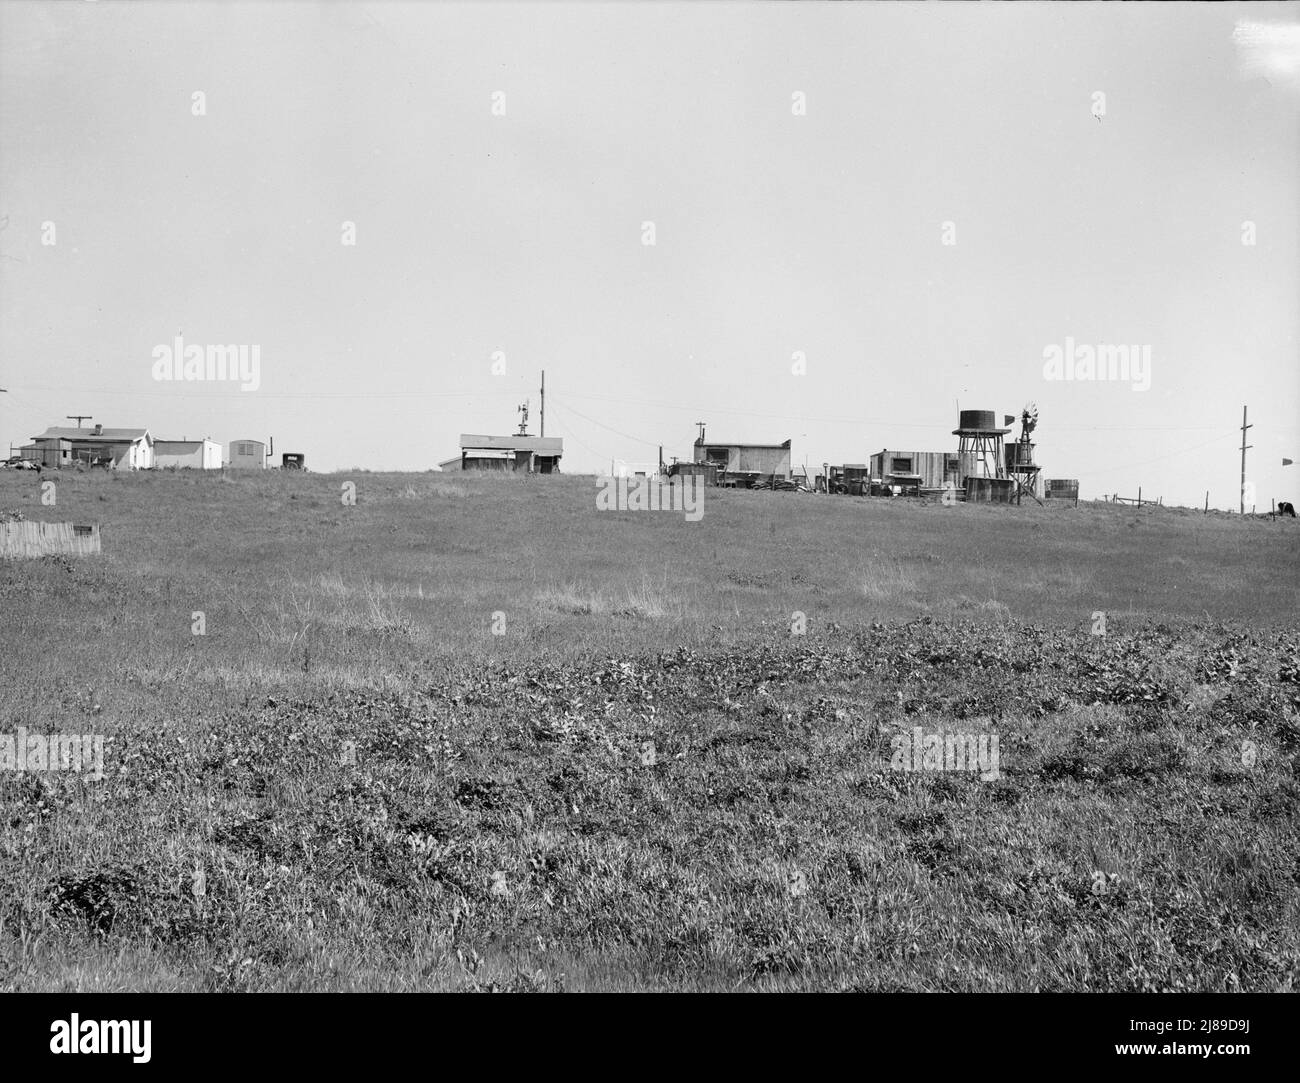 Settlement of small plots held mostly by lettuce shed workers, many from Oklahoma. Outskirts of Salinas, California. Stock Photo